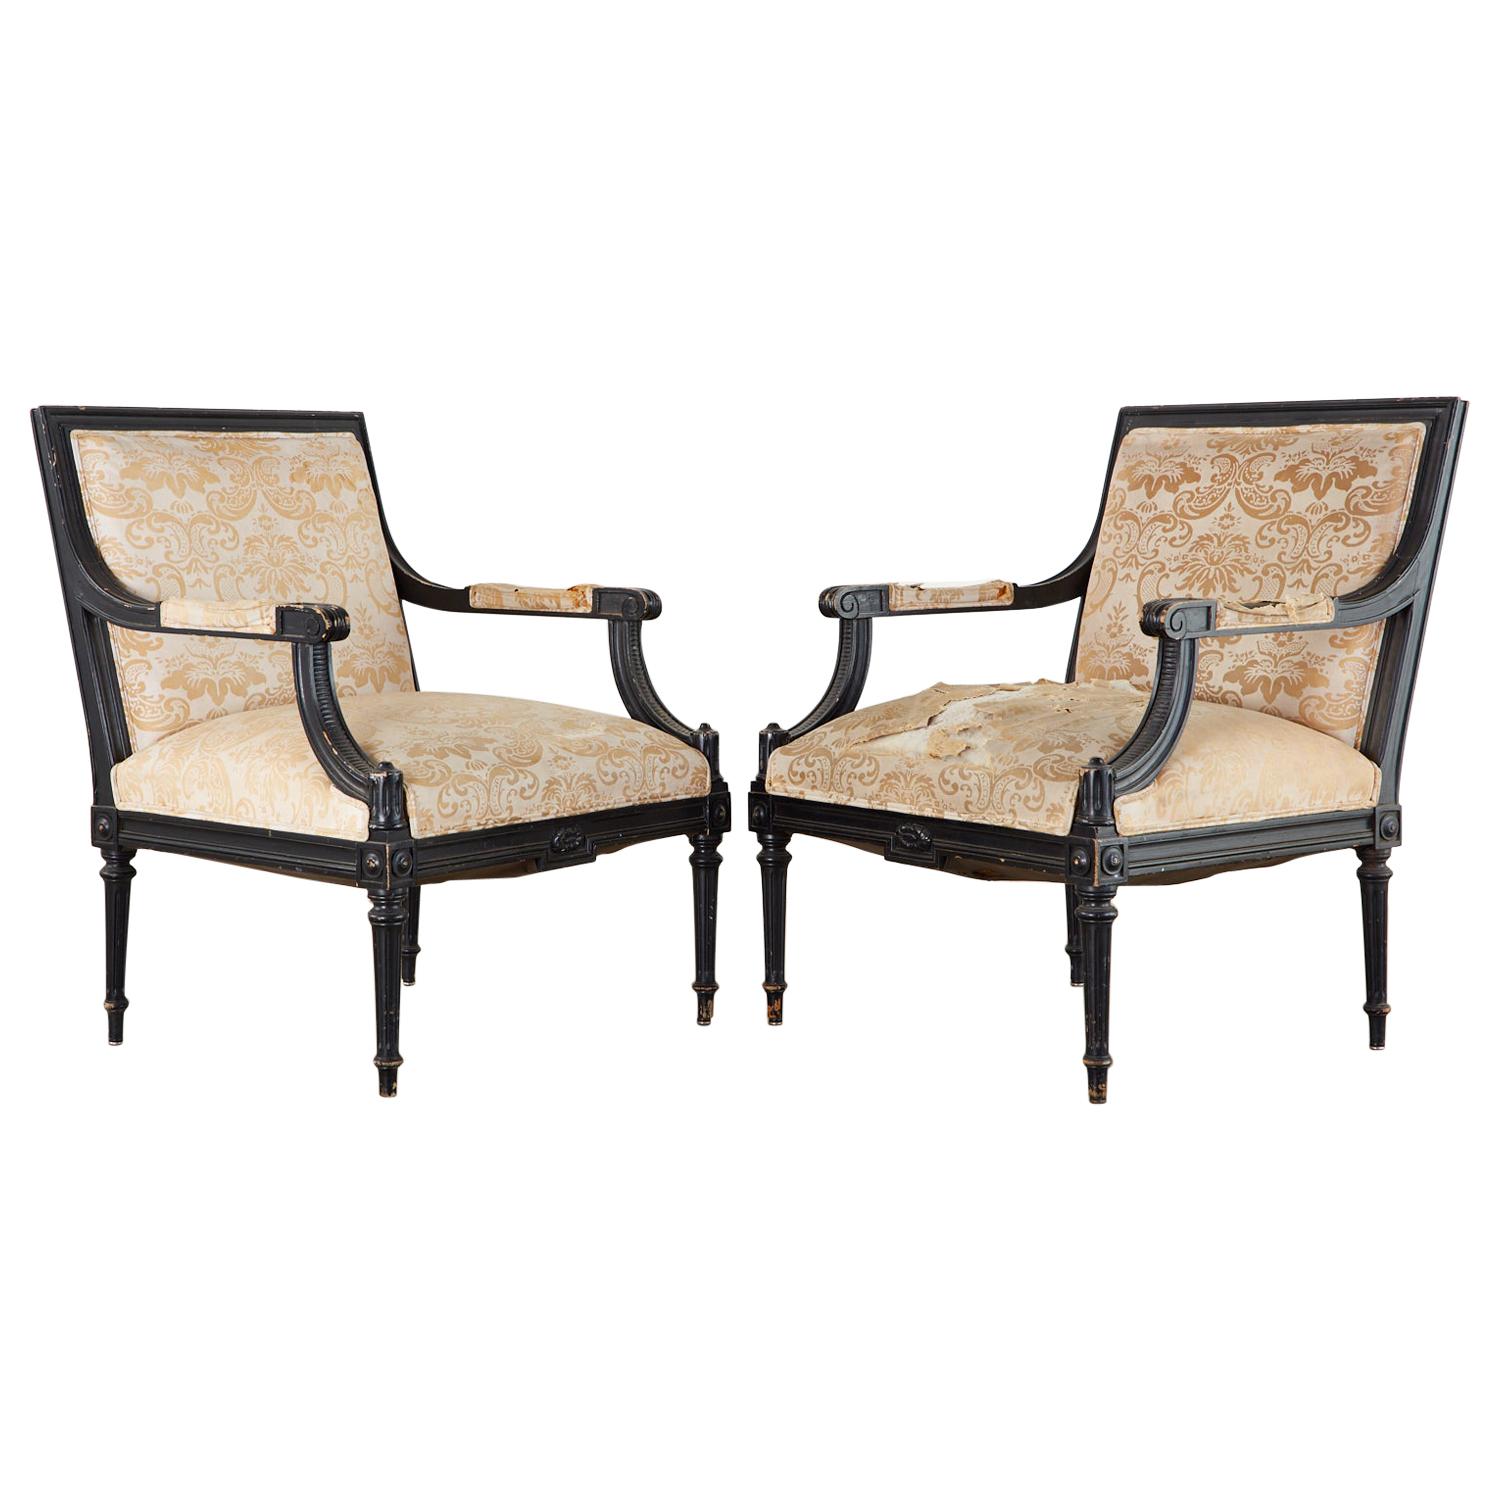 Pair of French Maison Jansen Style Fauteuil Armchairs